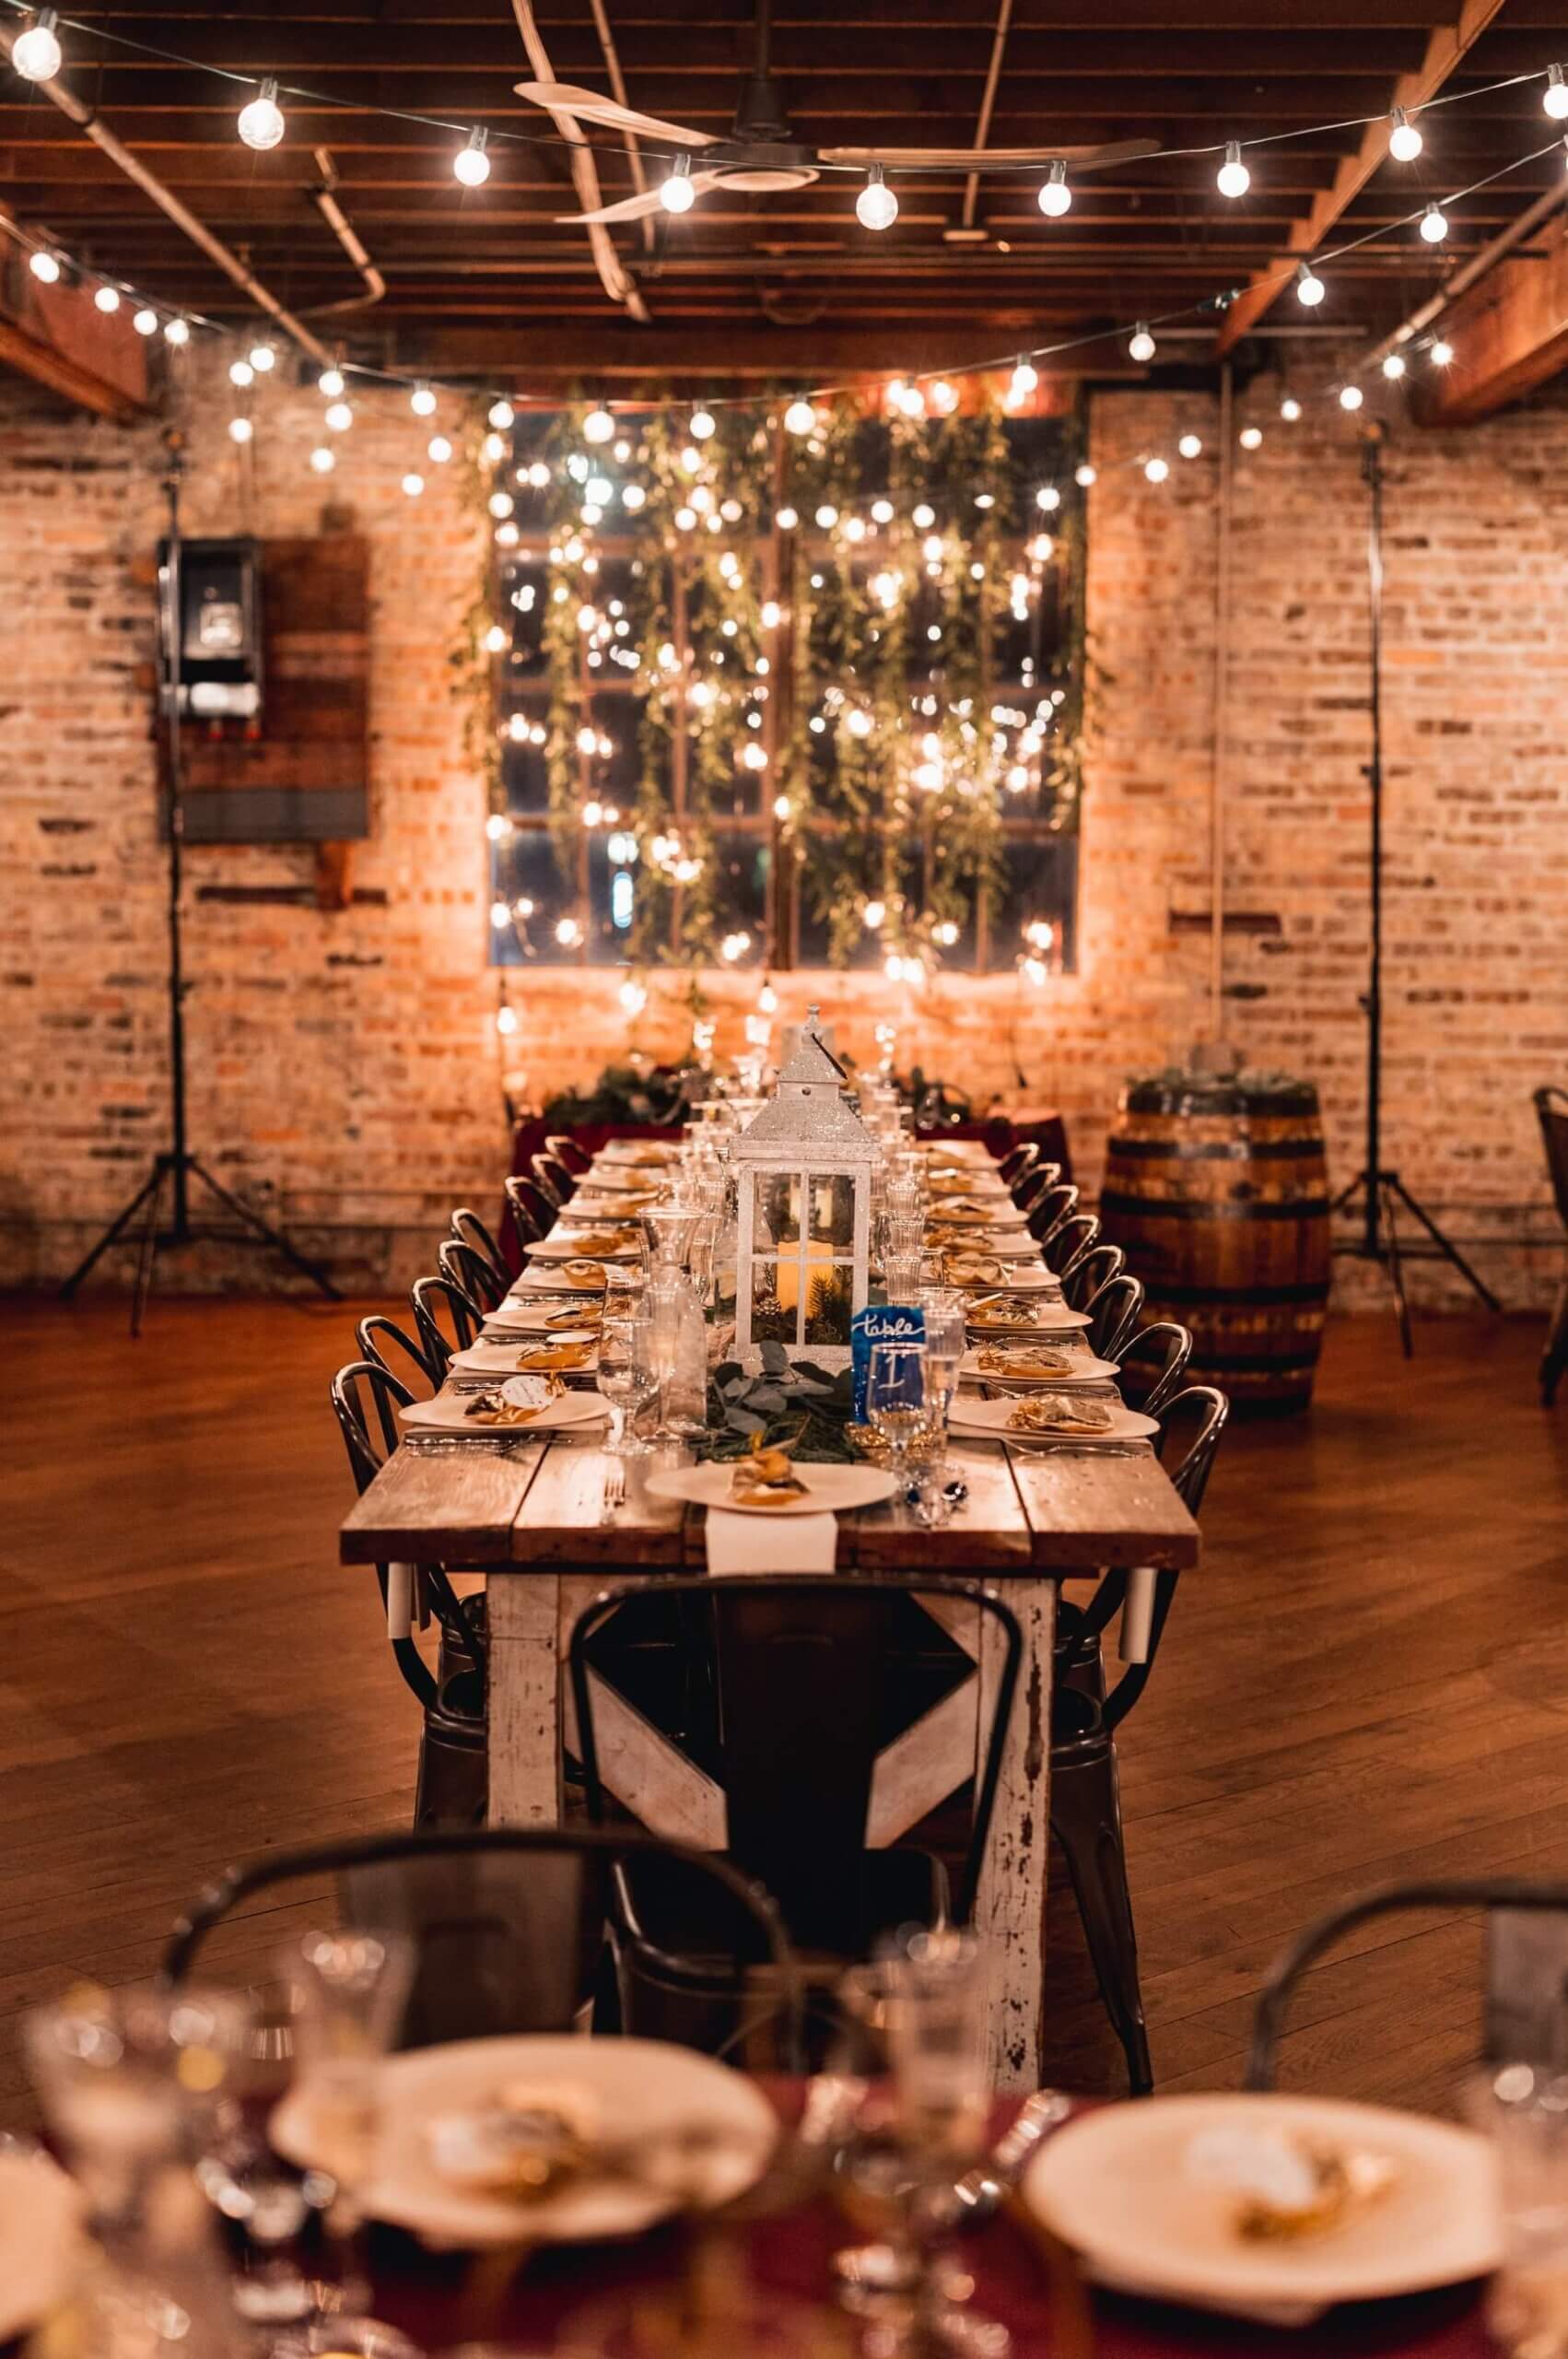 Farm table with lanterns with wall of greenery and lights at wedding venue in Illinois